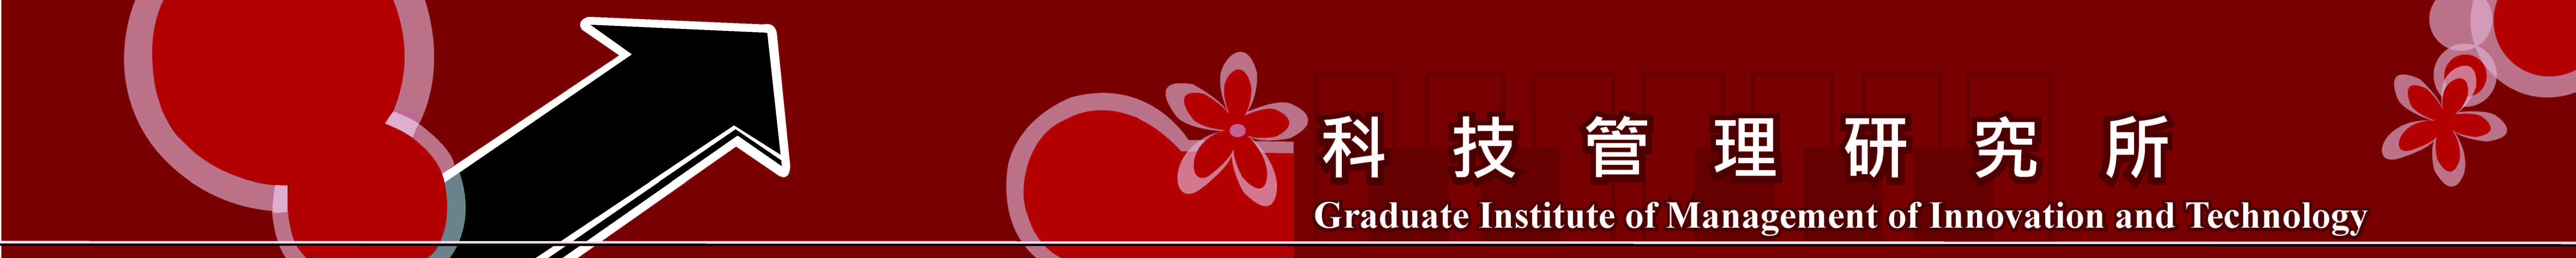 Graduate Institute of Management of Innovation and Technology